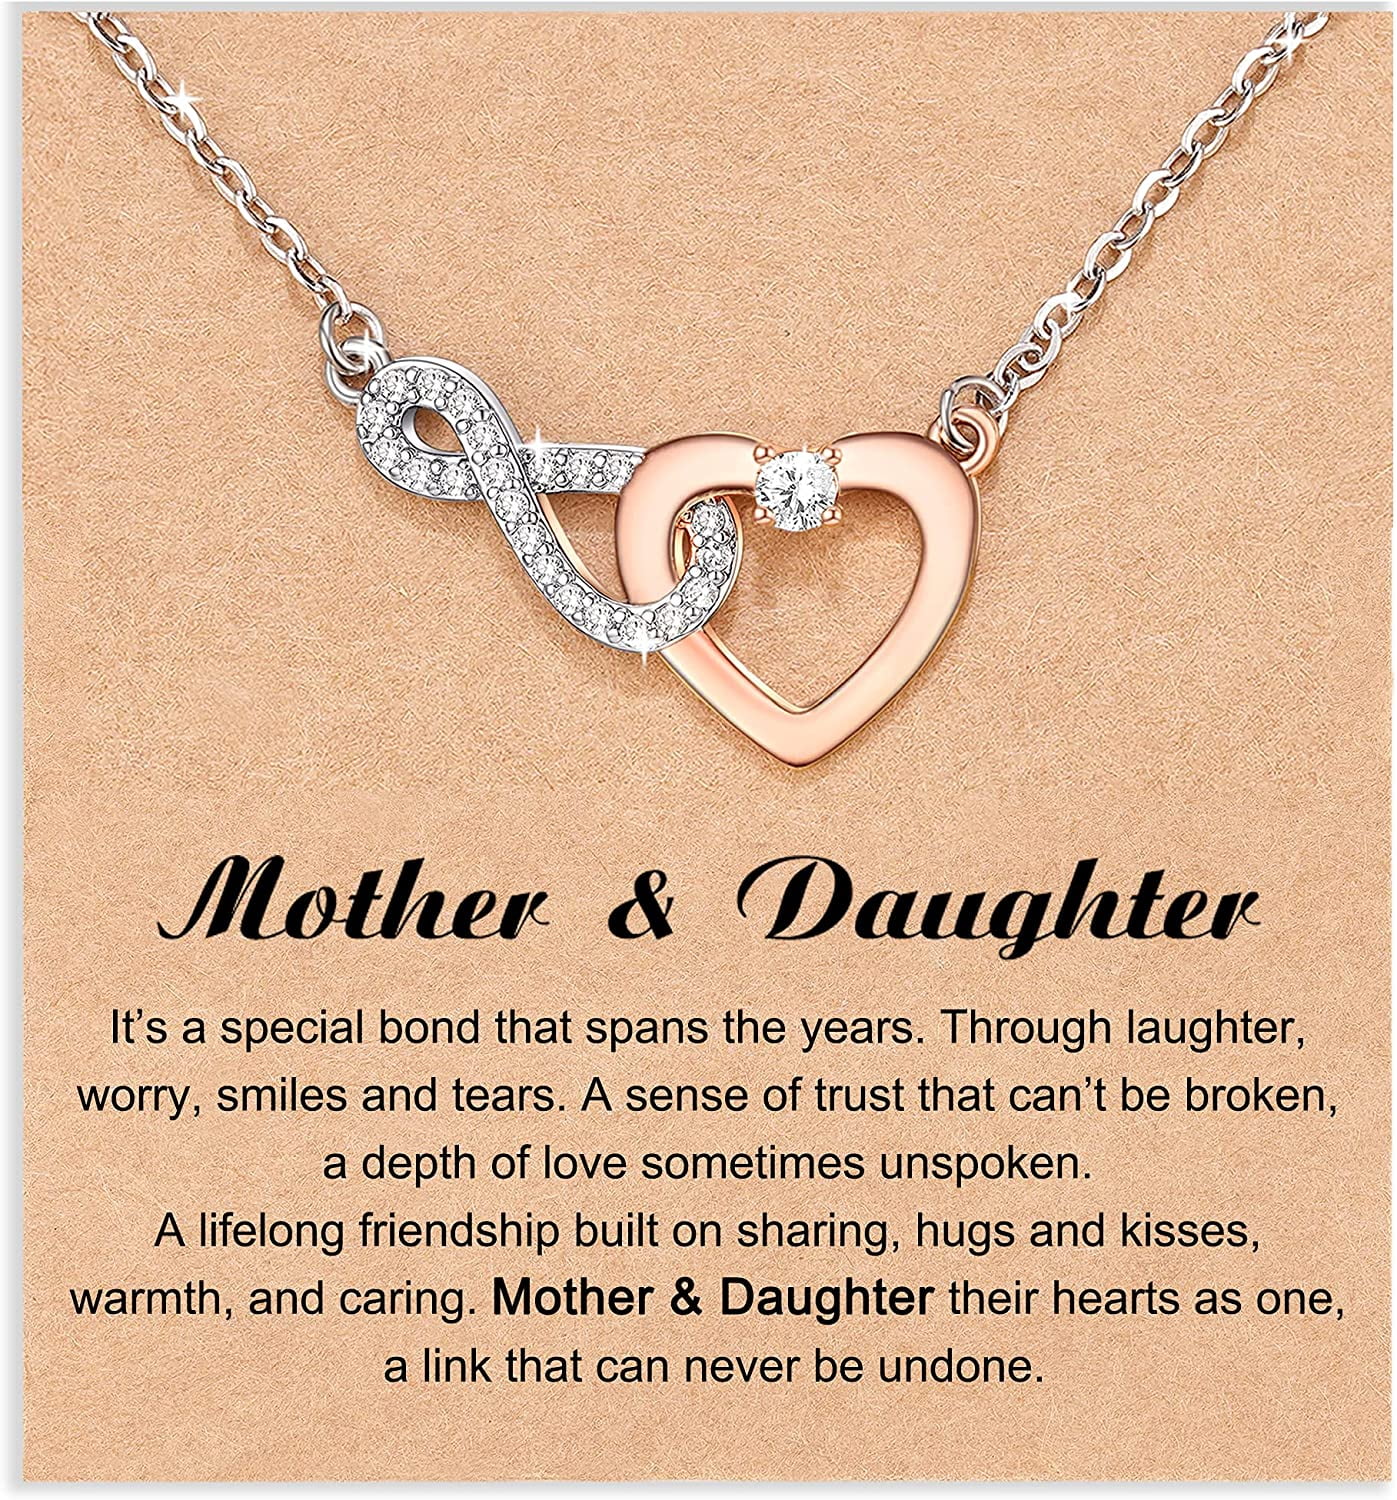 Mother Daughter Necklace Mothers Day Gifts from Daughter Infinity Heart Pendant Necklace Jewelry for Women Mother in Law Mom Birthday Gift 9be92d4b 2a7a 4cd2 81cd b424651f4d68.3306727f357679cba1d9c8177ac33db2